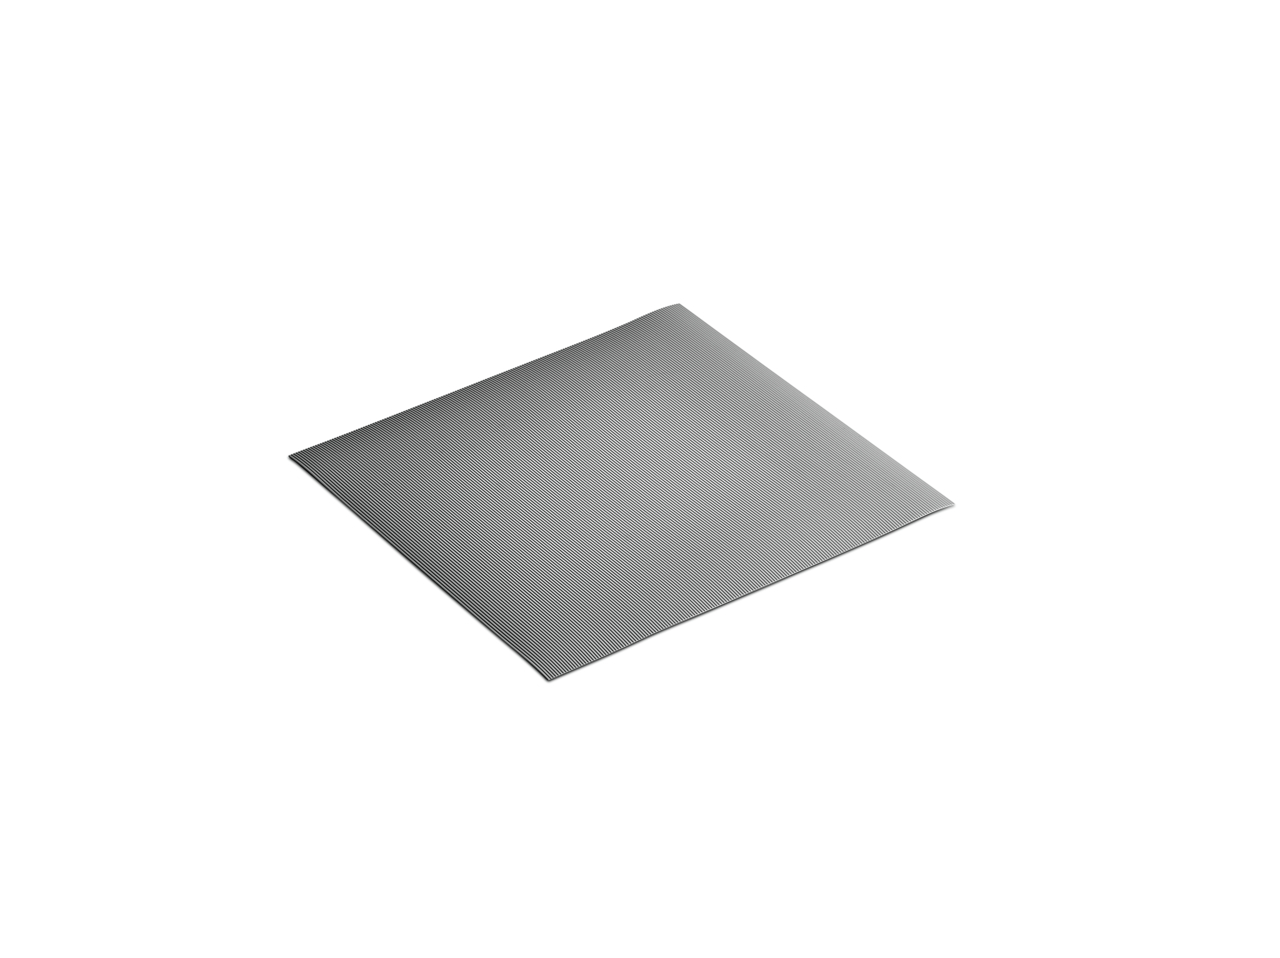 Anti-slide mat 2, up to 600 mm cabinets, W 500, D 480 mm, light grey